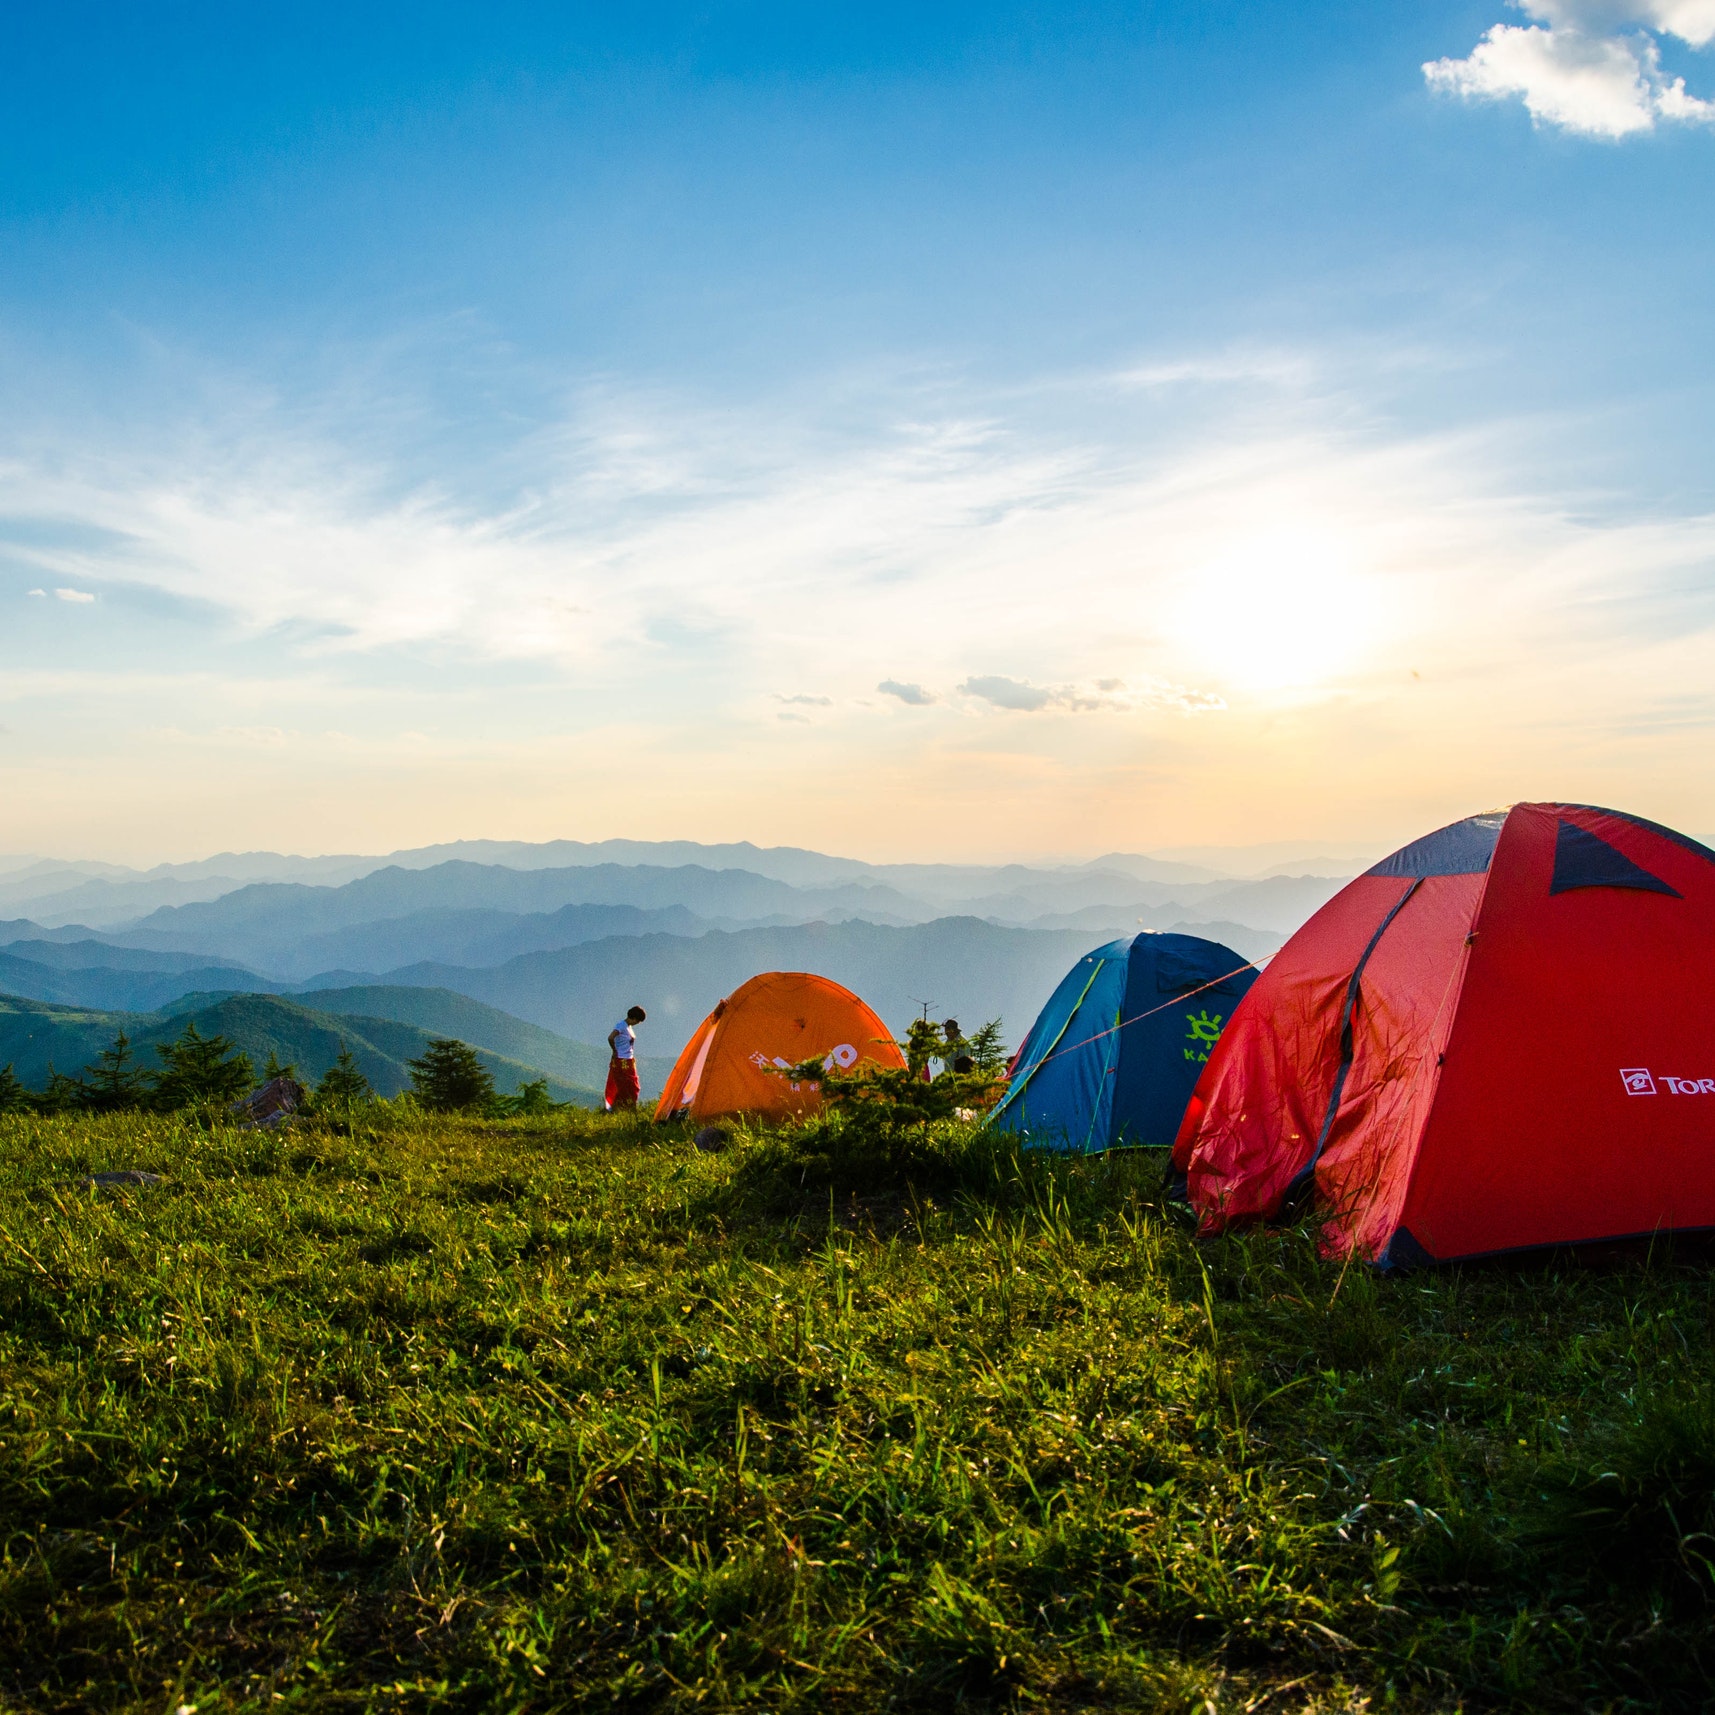 Tents overlooking mountains